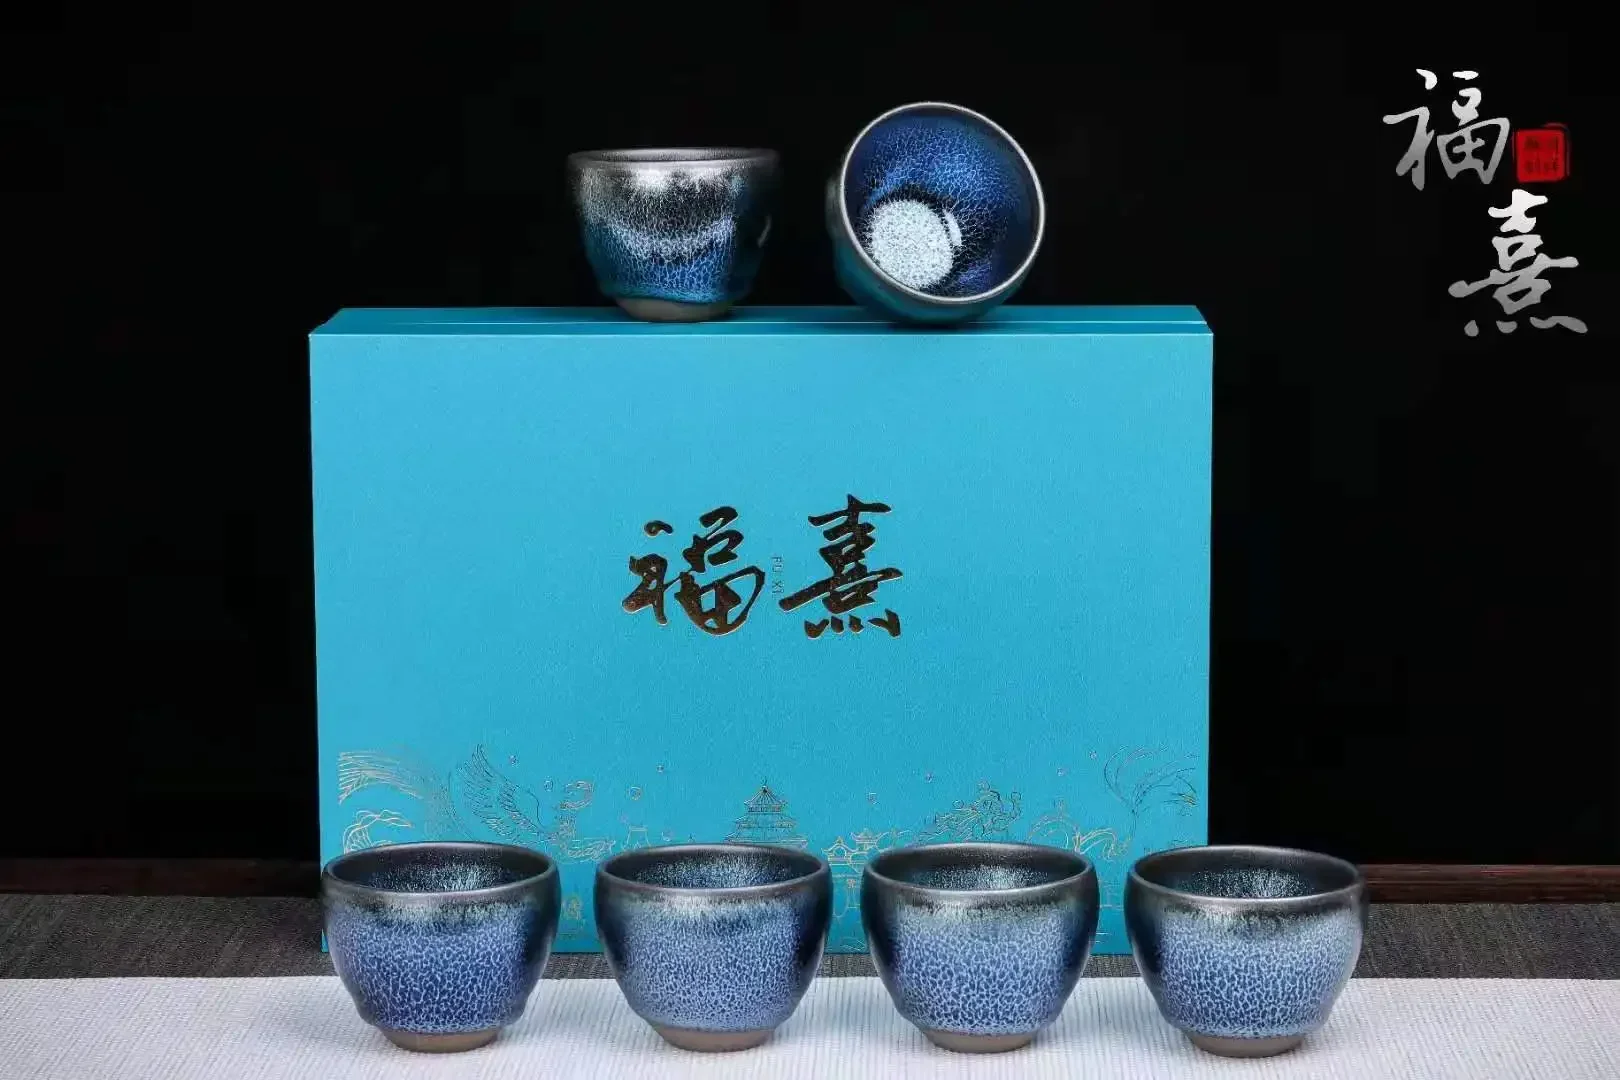 

Jianzhan Chinese Vintage Tea Cup Tea Cups Oil Glaze Tenmoku Pottery Health Benefits6 gift boxes for personal use/Blue Kirin suit